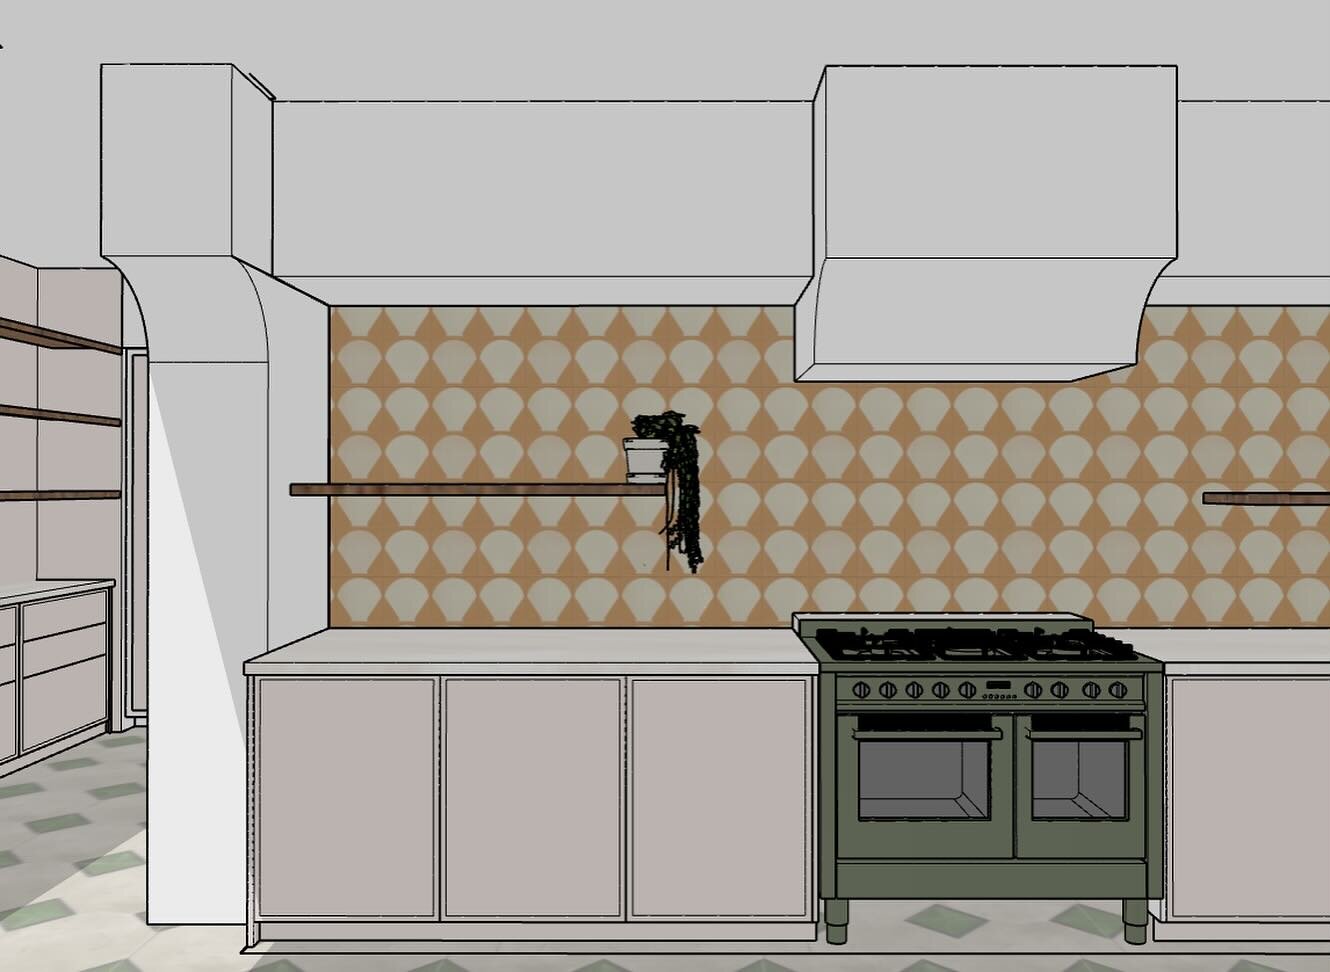 CAD design lets you visualize the finished result before you engage trades and start building - here we are sampling tiles from Teranova x Sarah Ellison (first two images). 

#caddesign #meditteraneanstyle #kitchenrenovation #kitchendesign #scallop #